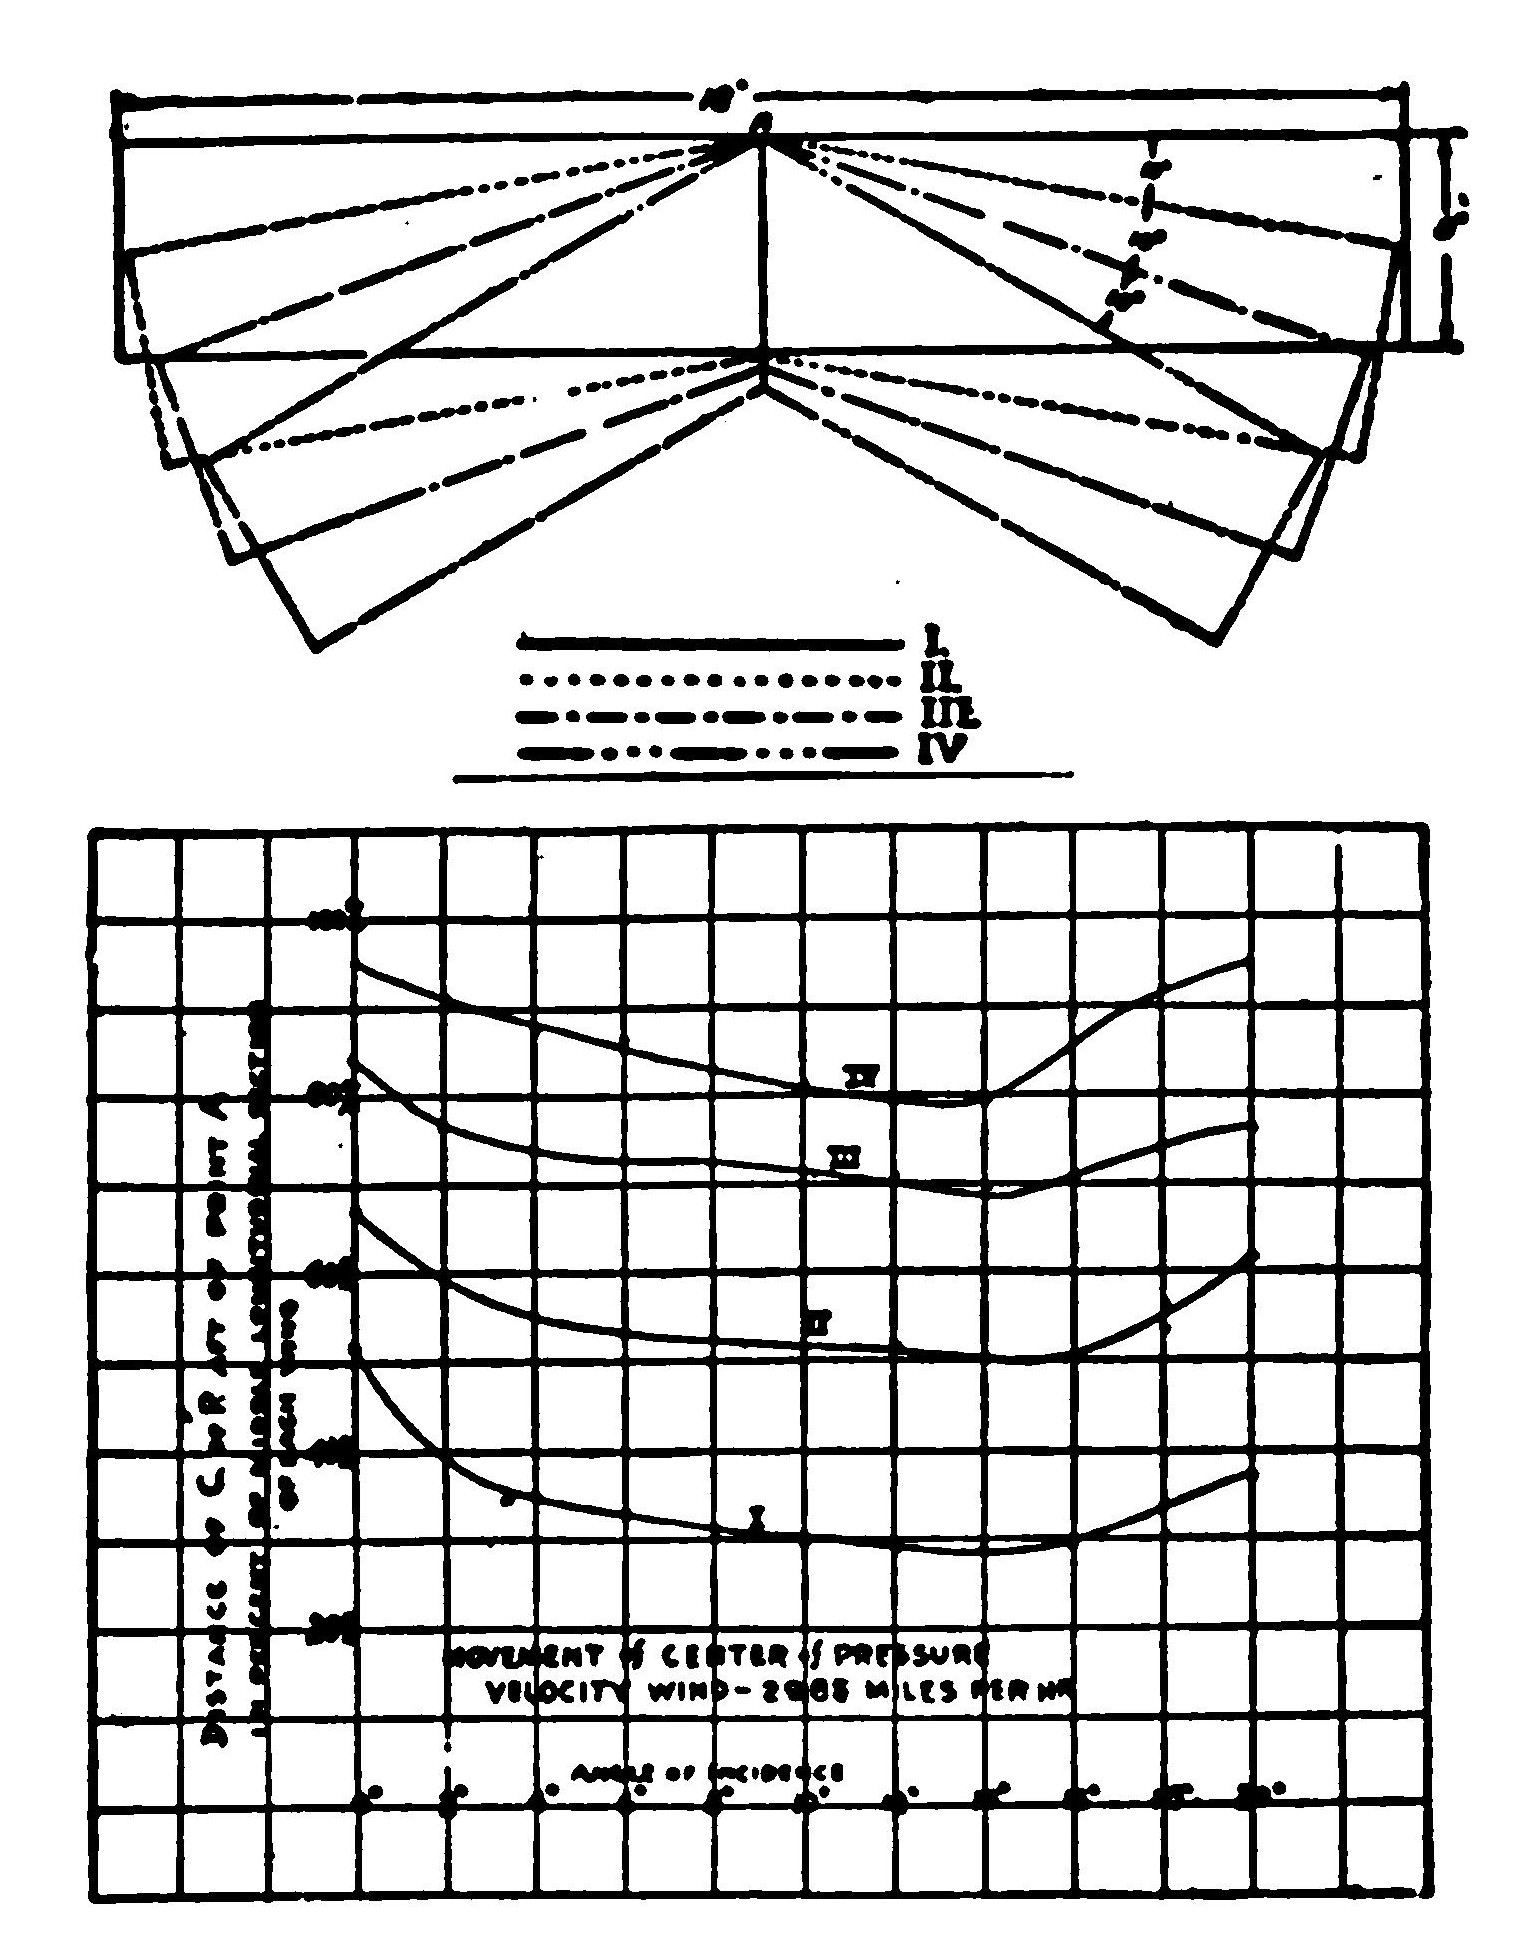 Fig. 10. (Upper) Various Angles Made by Wings During Experiments. (Below) The Center of Pressure Movement with Varying Angles.